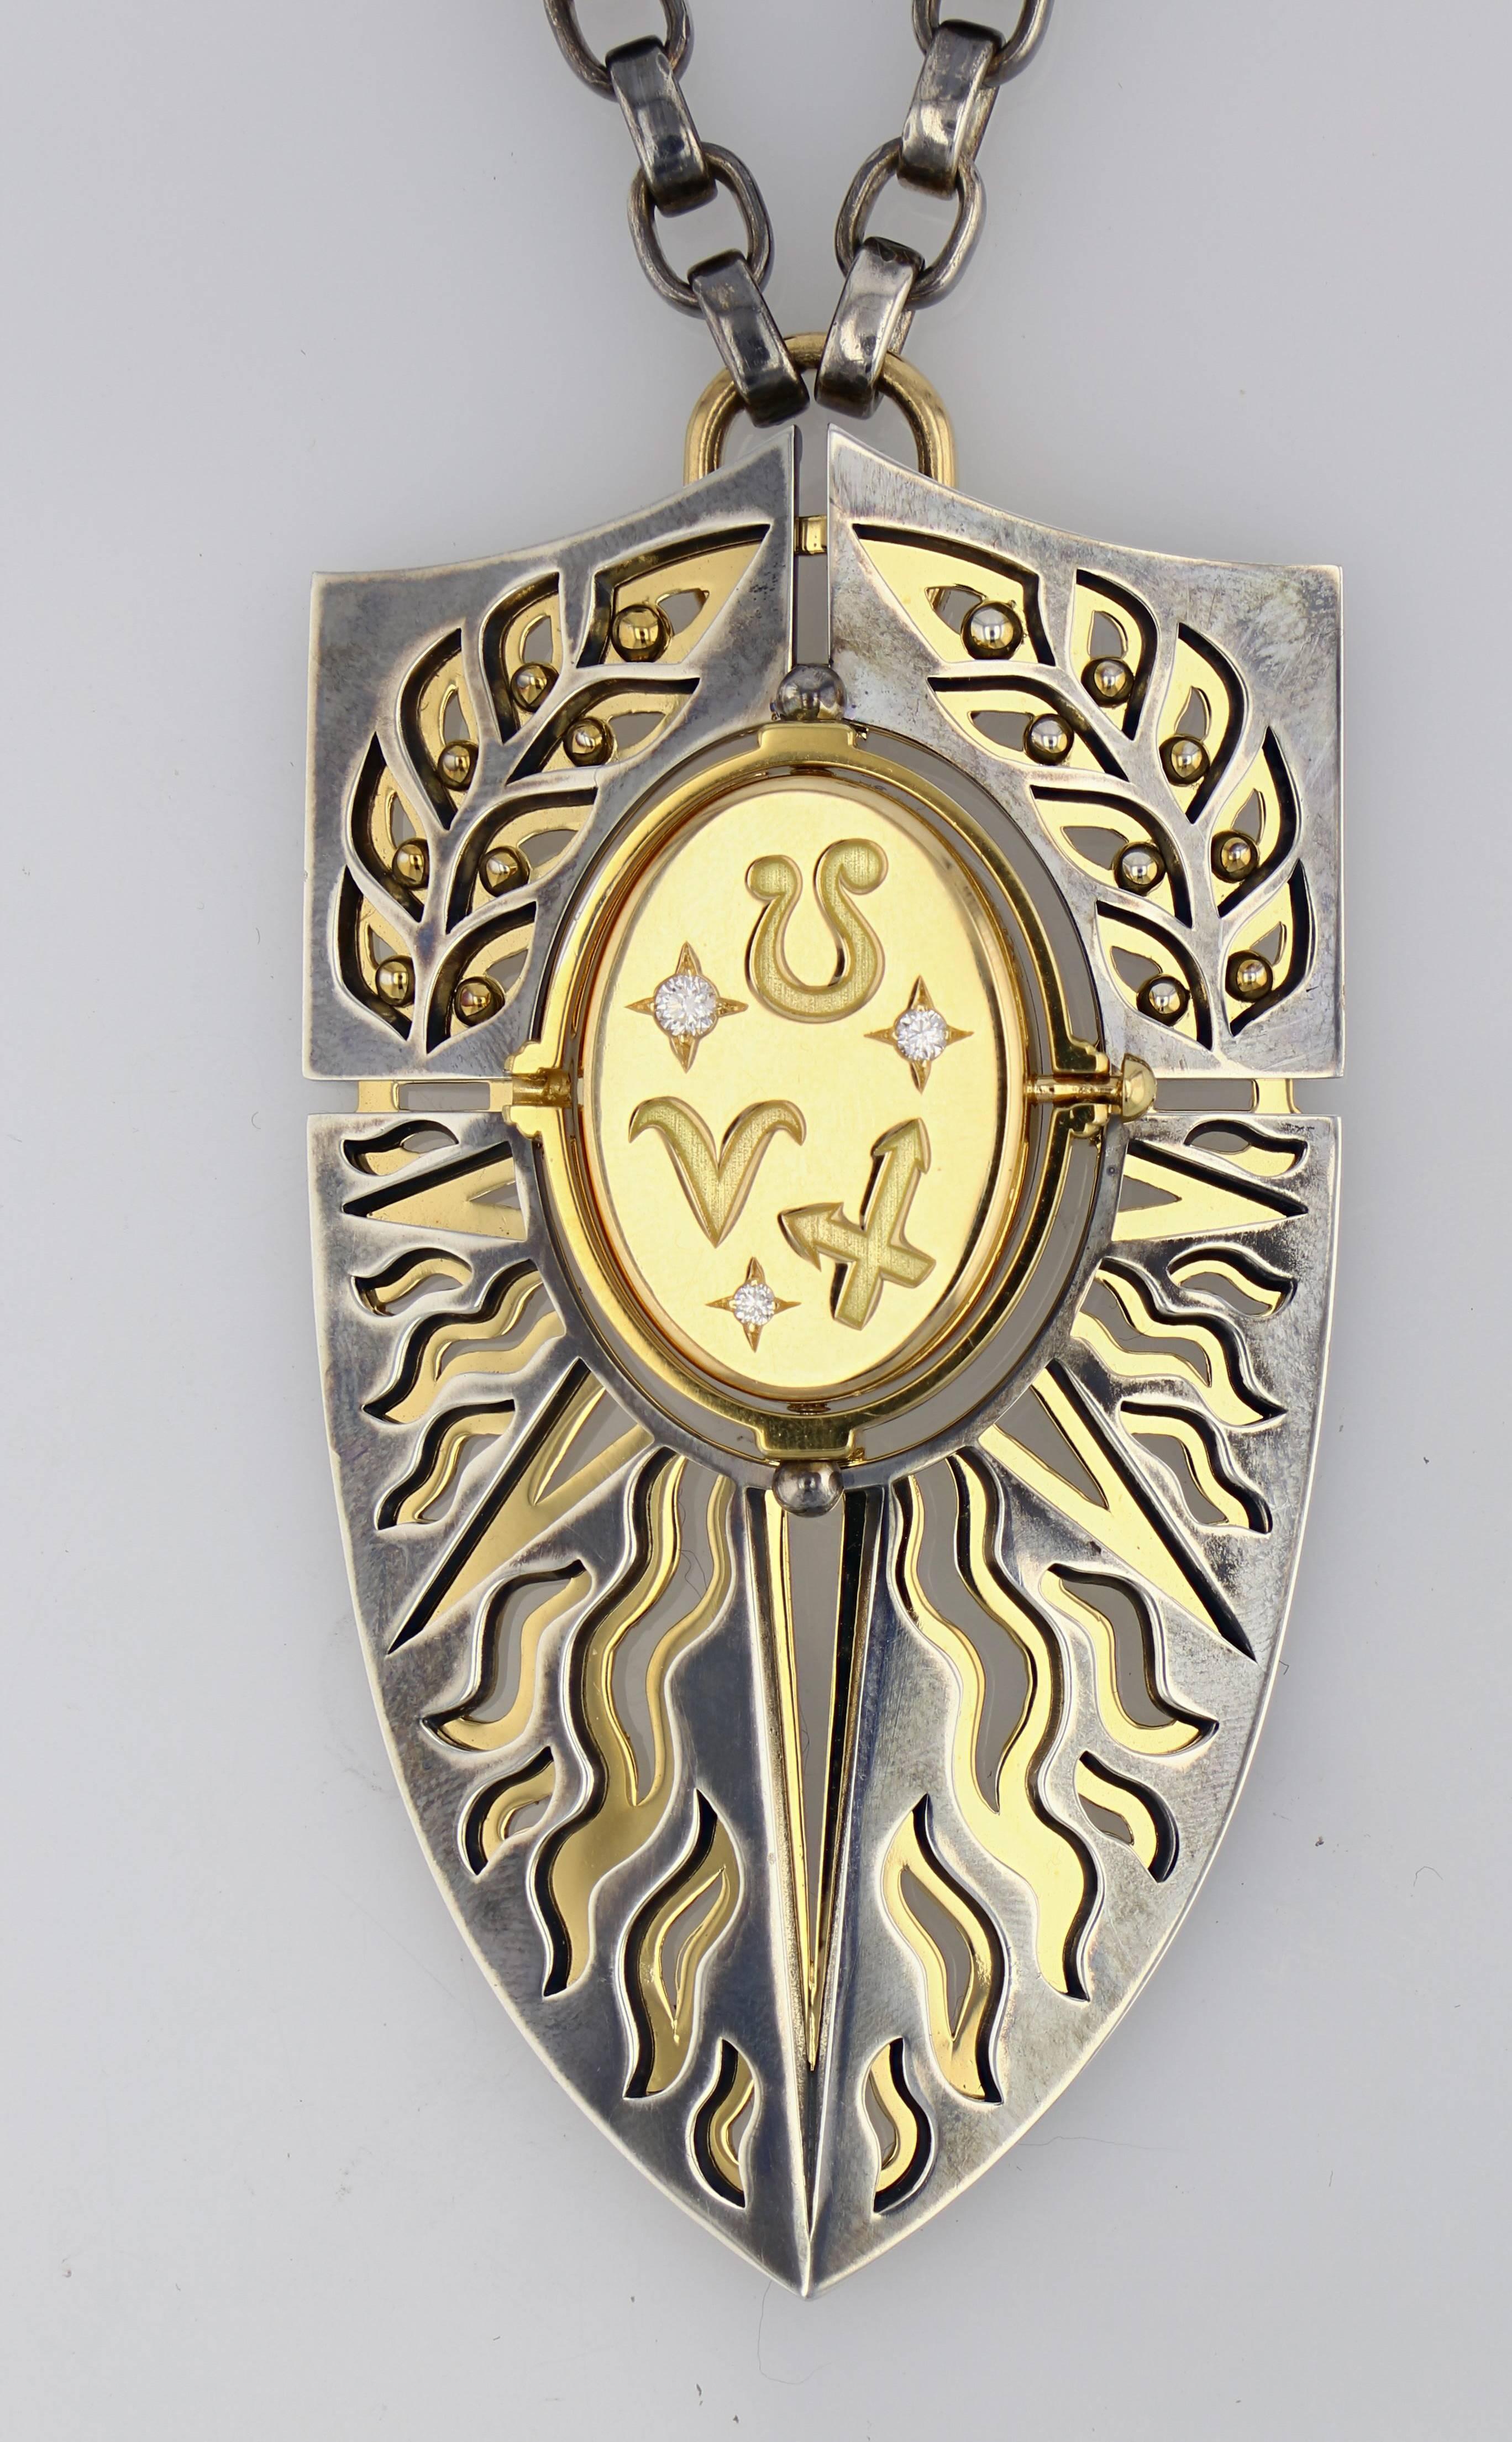 Shield Pendant FEU

Necklace of arms necklace mounted on a patinated silver chain, with a silver and yellow gold clasp engraved with tarot colors. The necklace is pierced, revealing plates with embossed motifs depicting the seasons. The pivoting